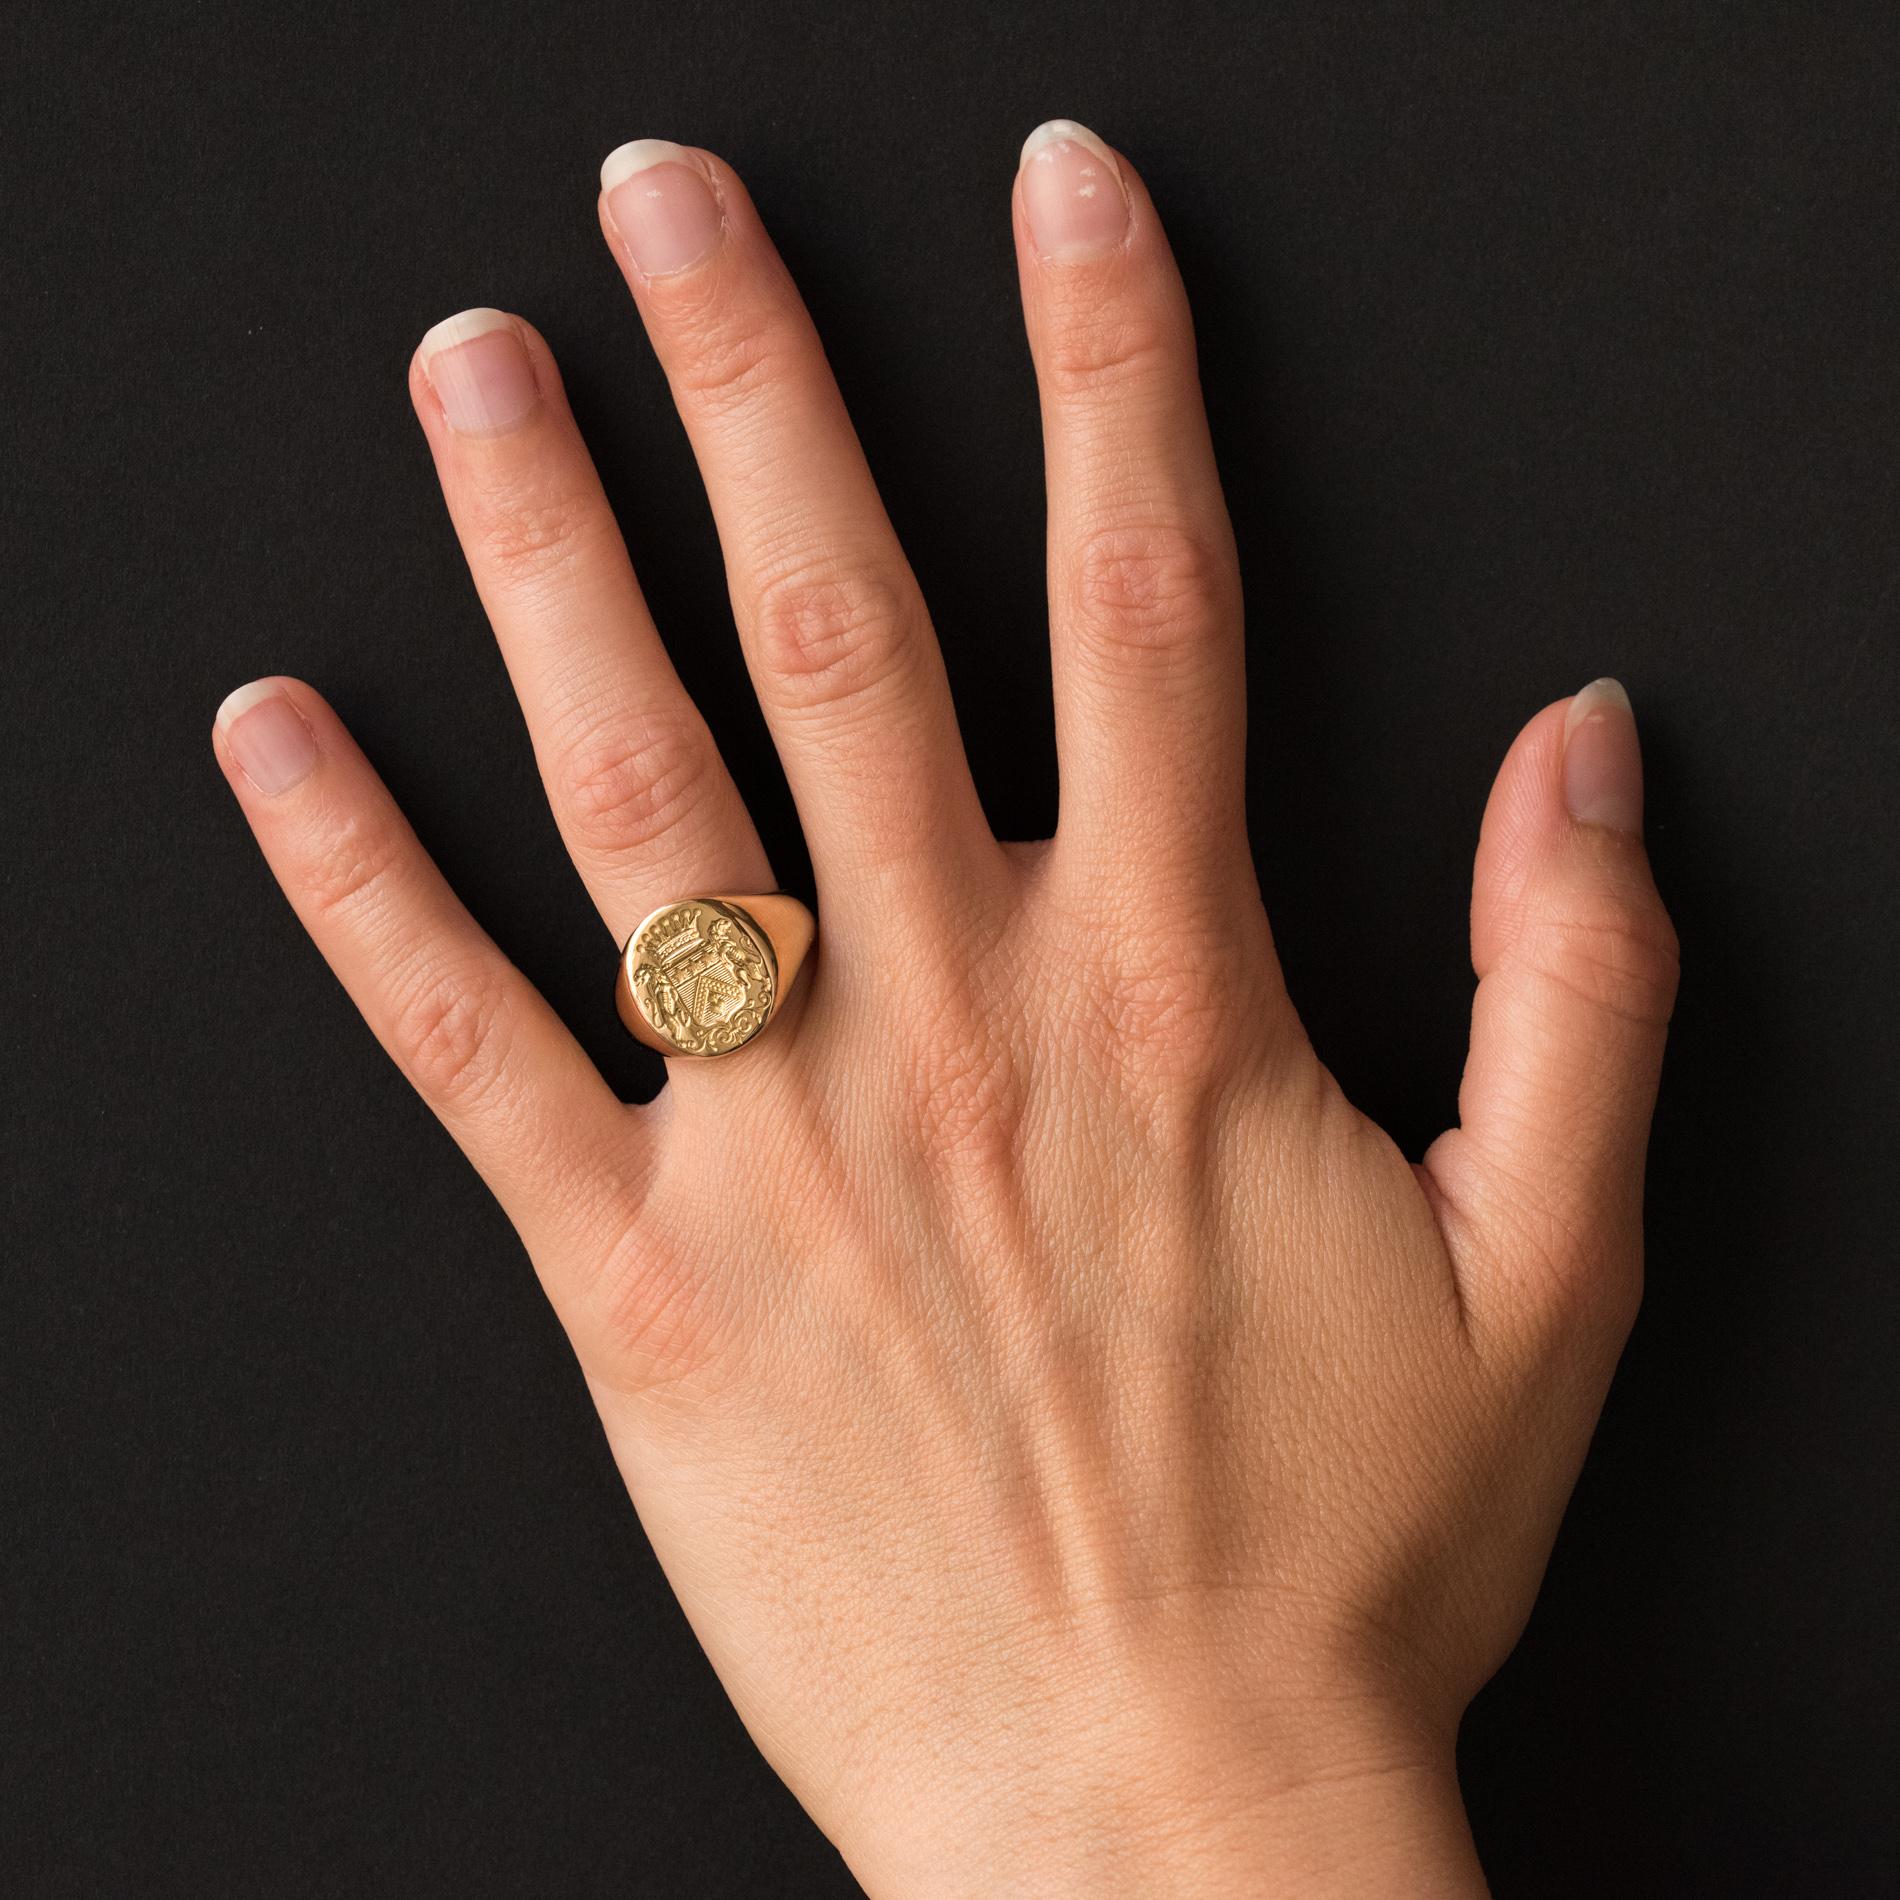 Signet ring in 18 karat yellow gold, eagle's head hallmark.
A crowned and supported by lions blazon is engraved on the mounting of this men's signet ring realized in the spirit of the antique signet rings.
Height: 15.2 mm, width: 13 mm, thickness: